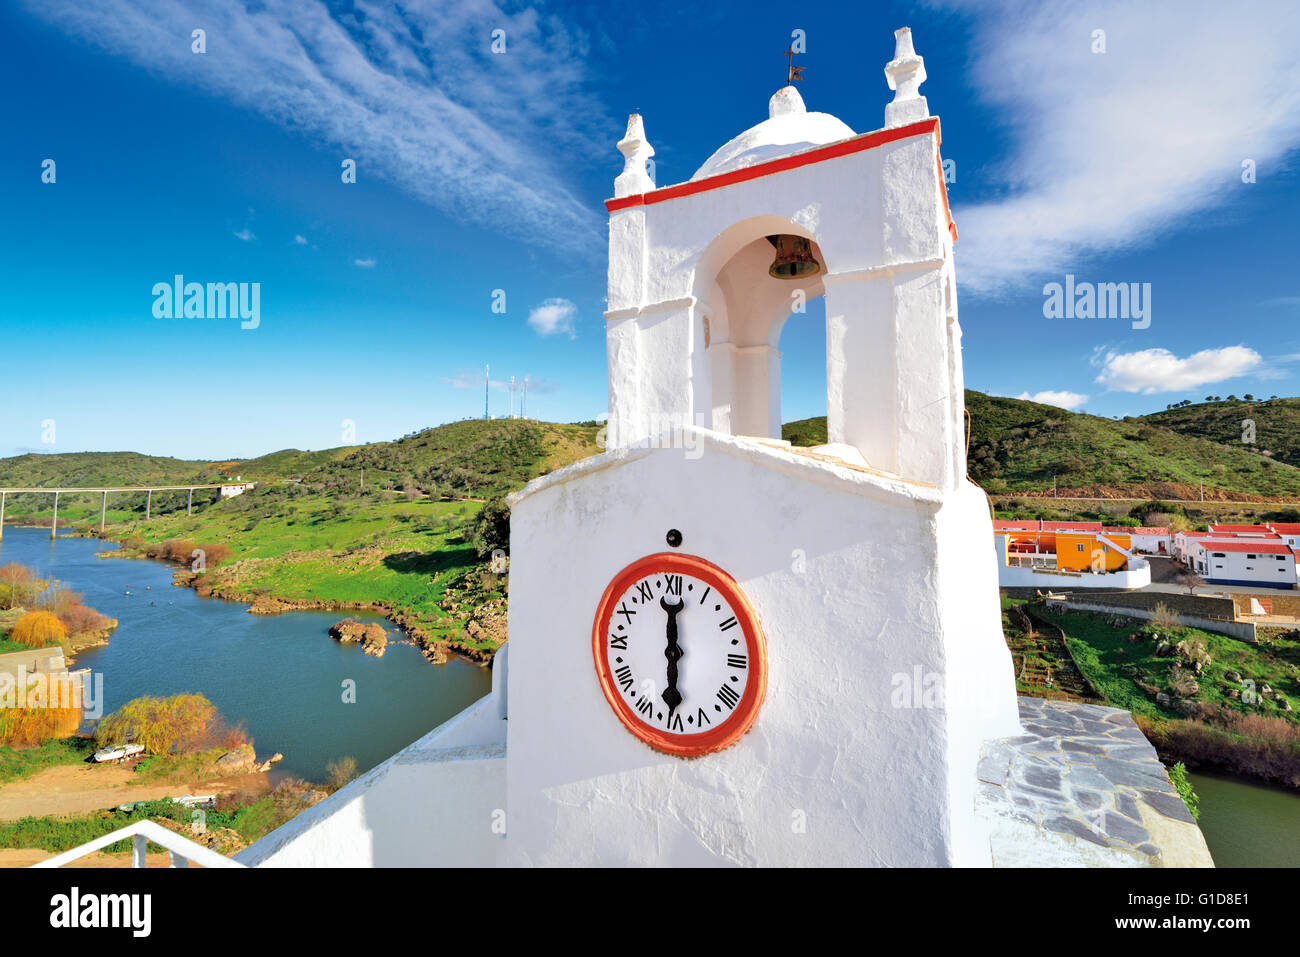 Portugal, Alentejo: Medieval clock tower and view to river Guadiana in Mértola Stock Photo